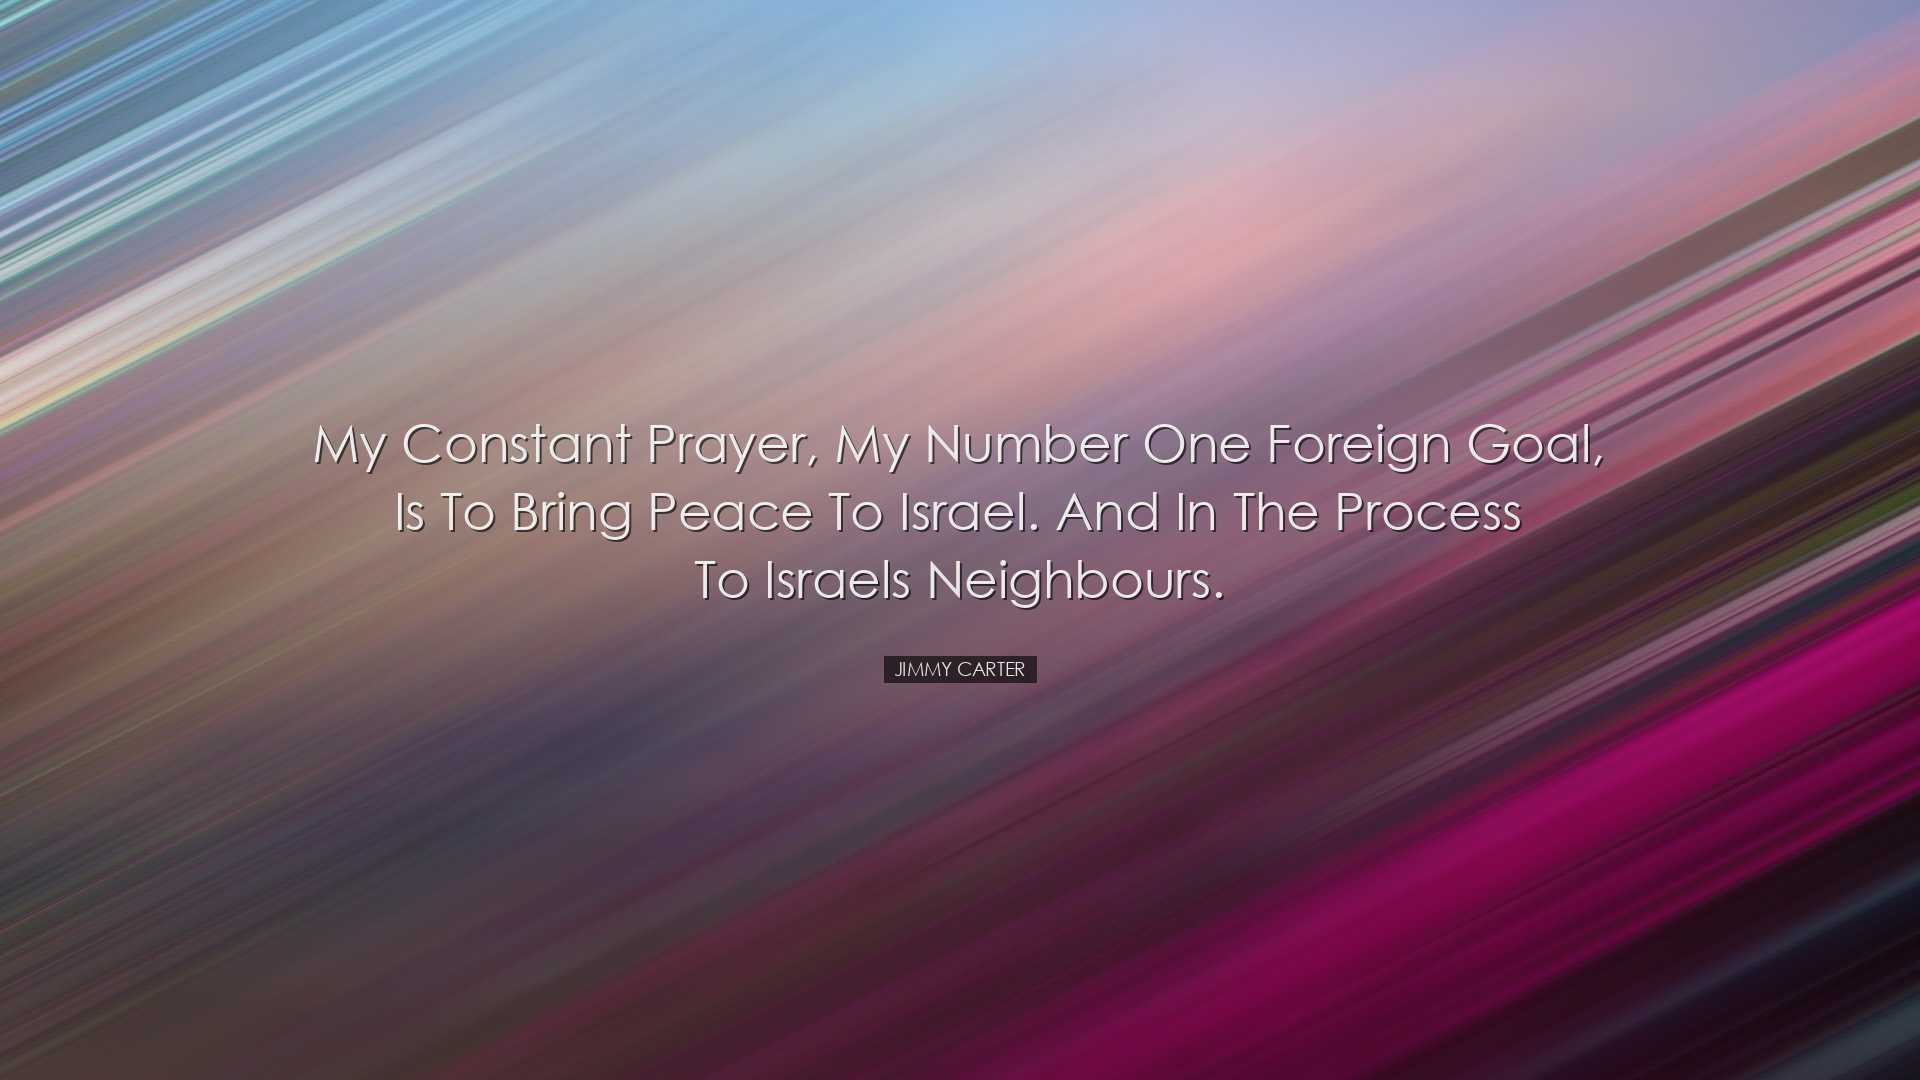 My constant prayer, my number one foreign goal, is to bring peace